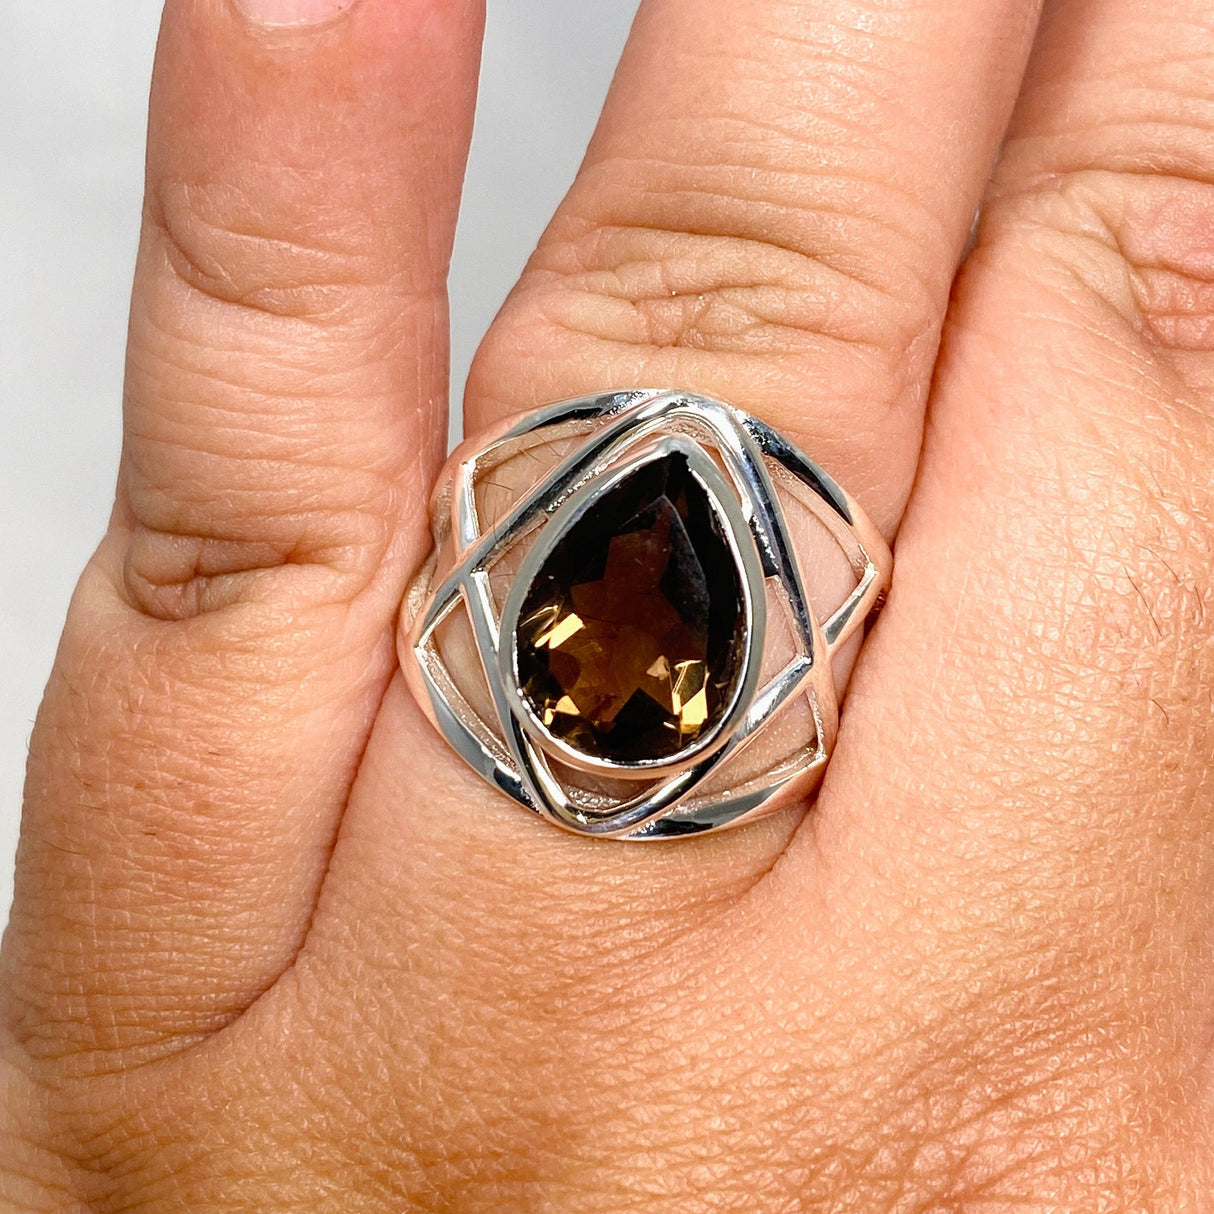 Smokey Quartz Faceted Teardrop Ring in a Decorative Setting R3686 - Nature's Magick